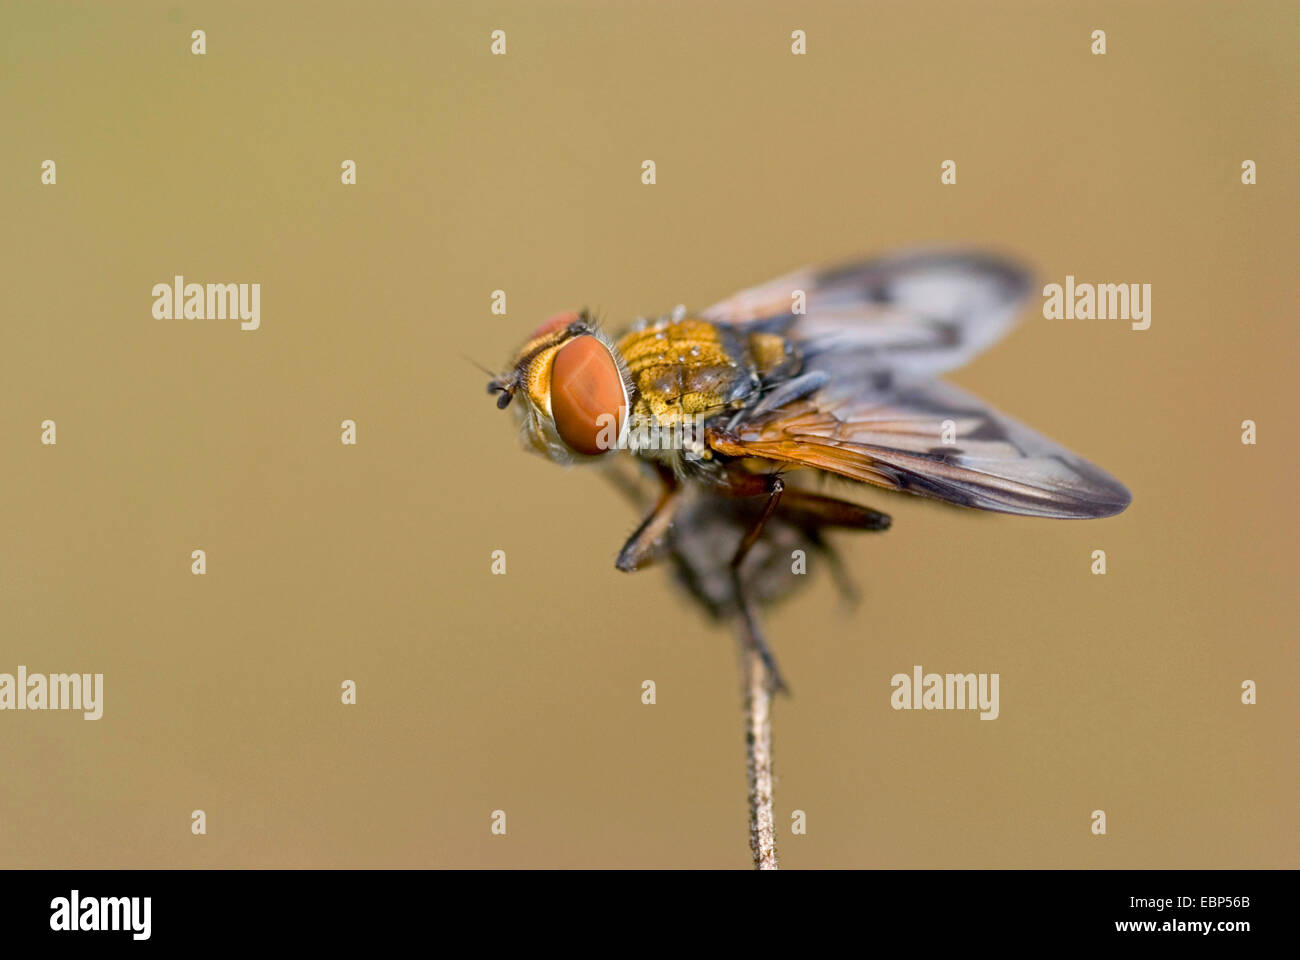 Parasite fly, Tachinid Fly (Ectophasia crassipennis) su uno stelo, Germania Foto Stock